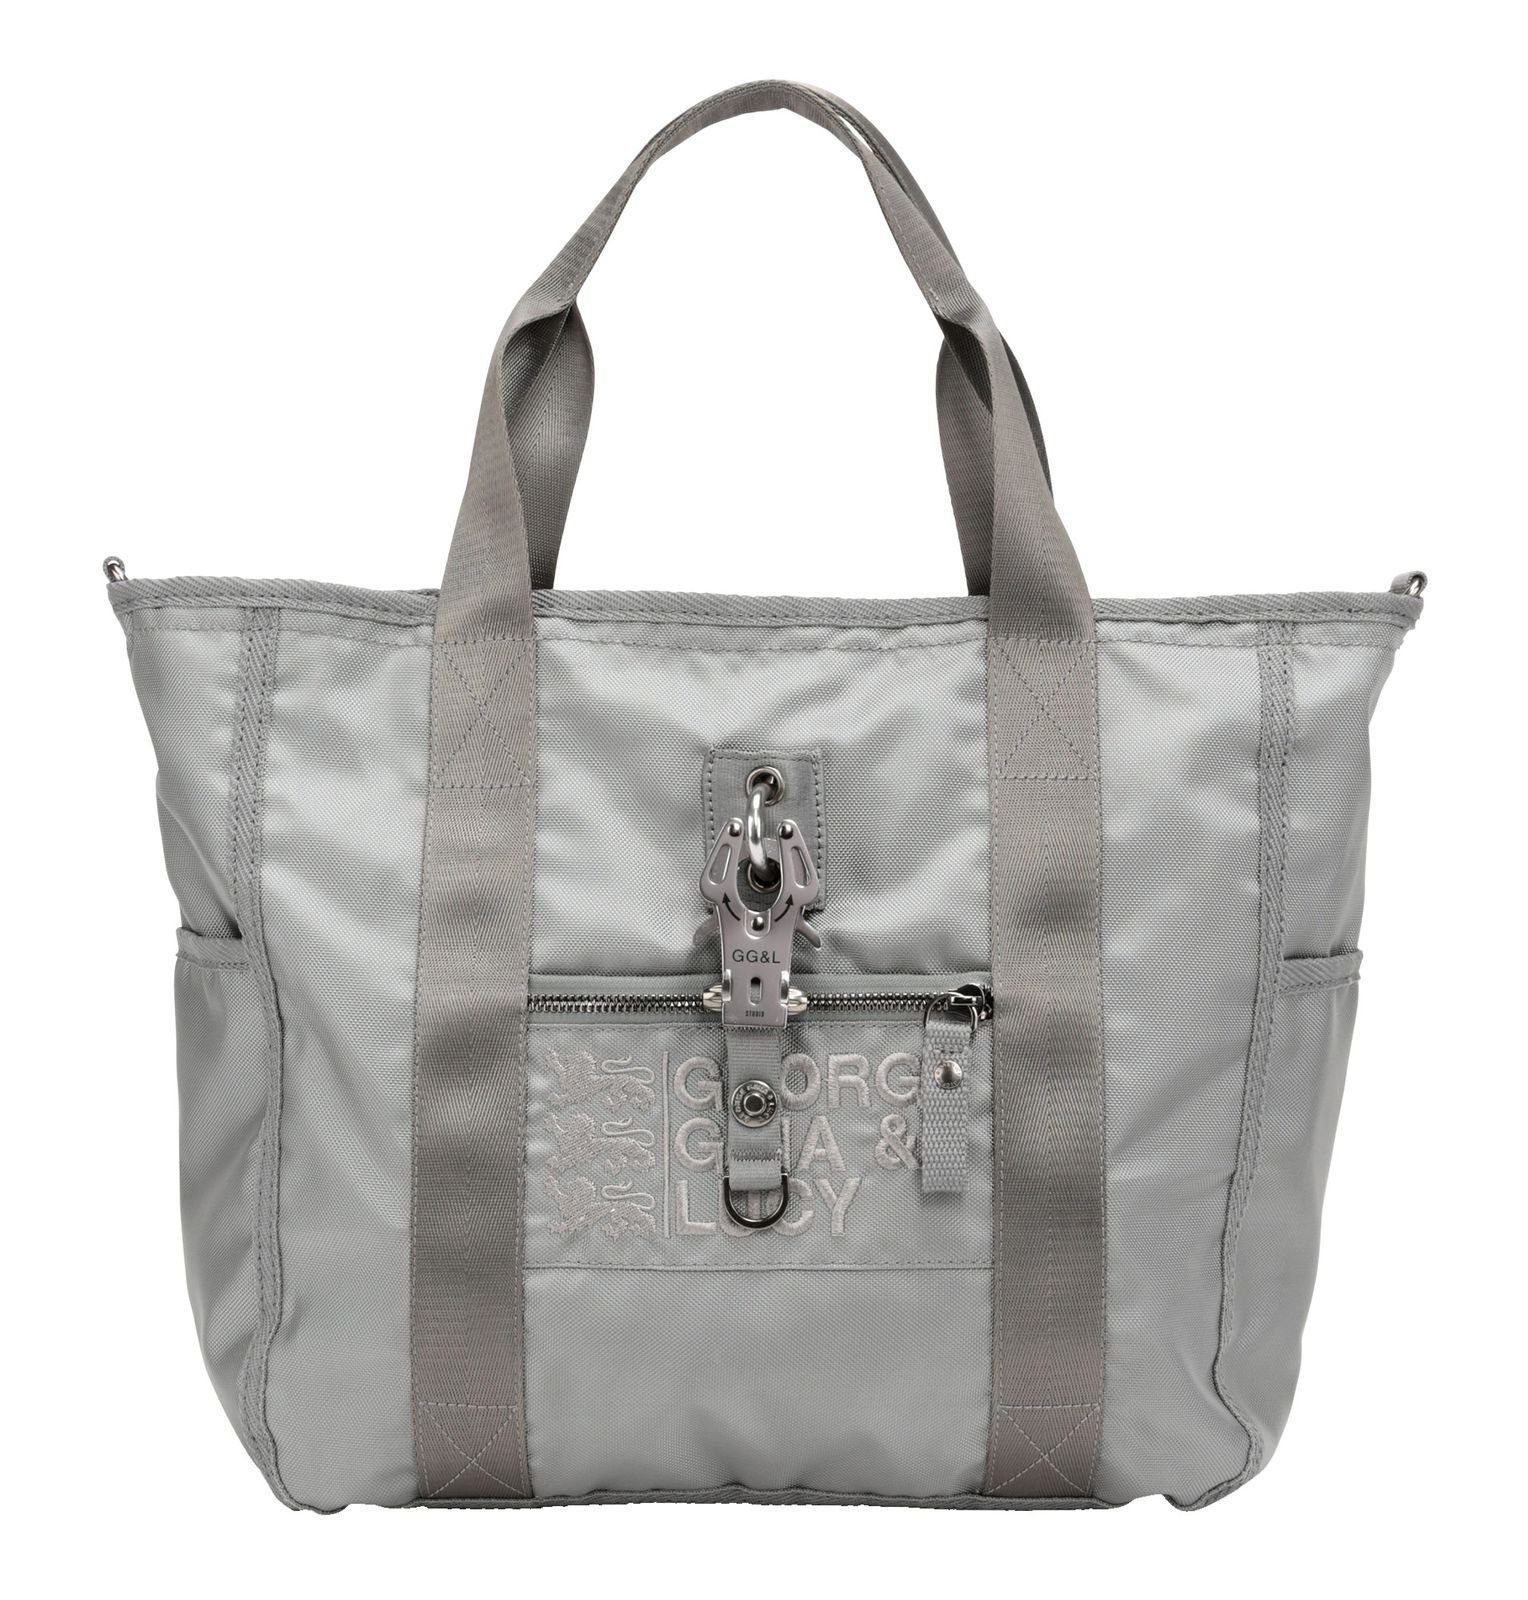 George Gina Nylon Schultertasche & Lucy Stoned Basic